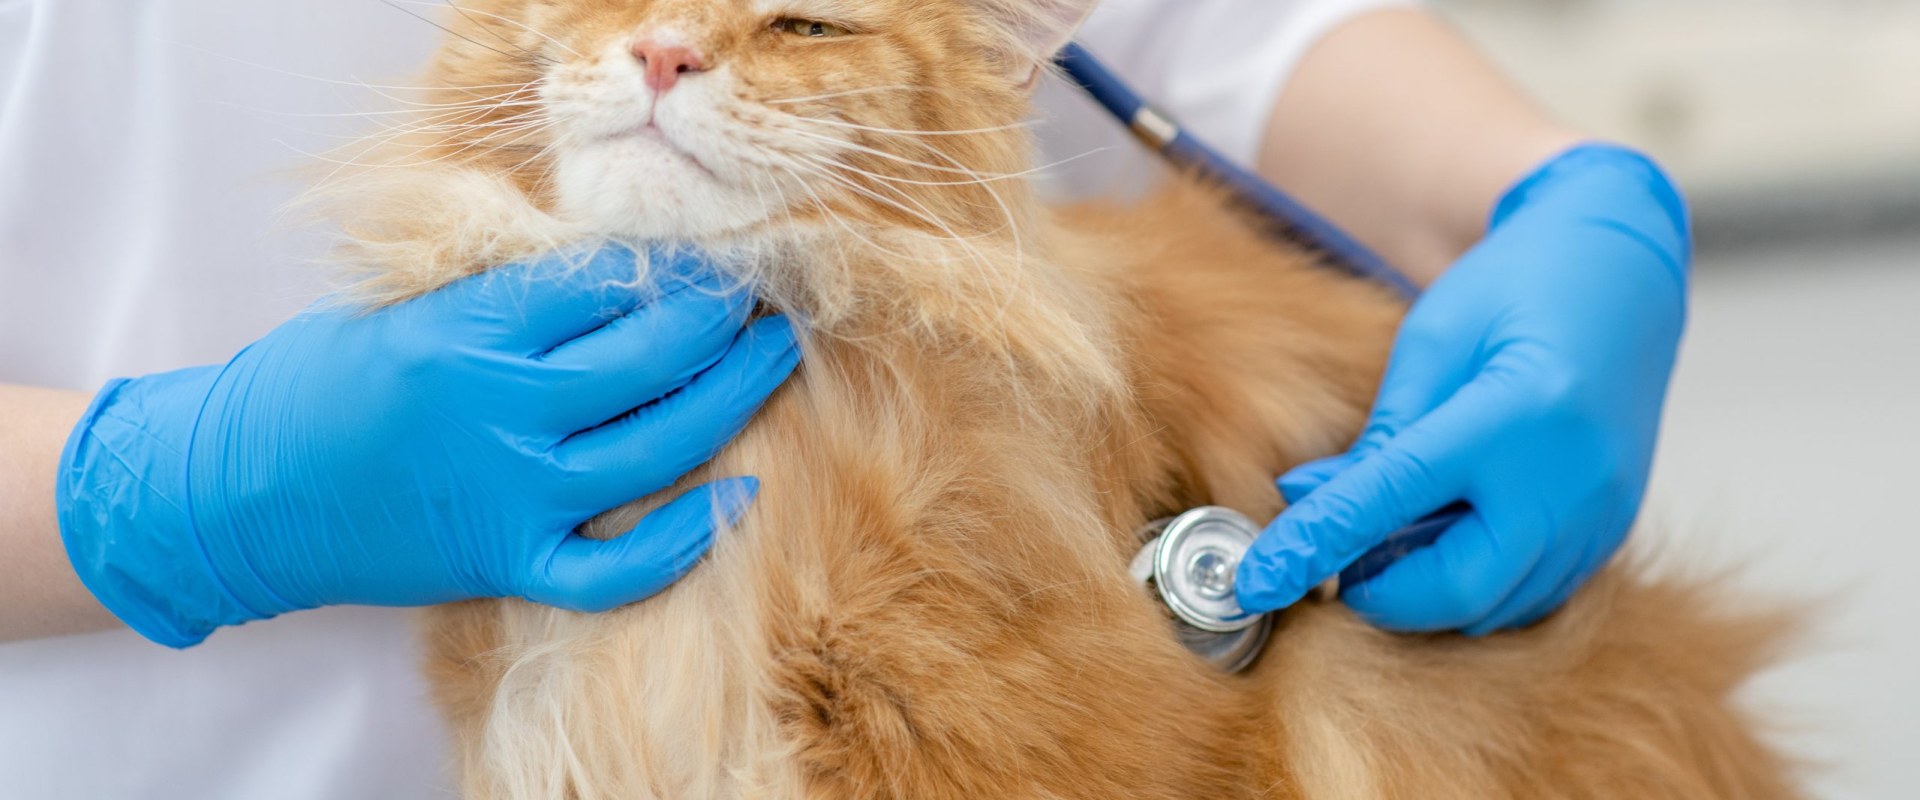 Choosing a Veterinarian for Your Cat